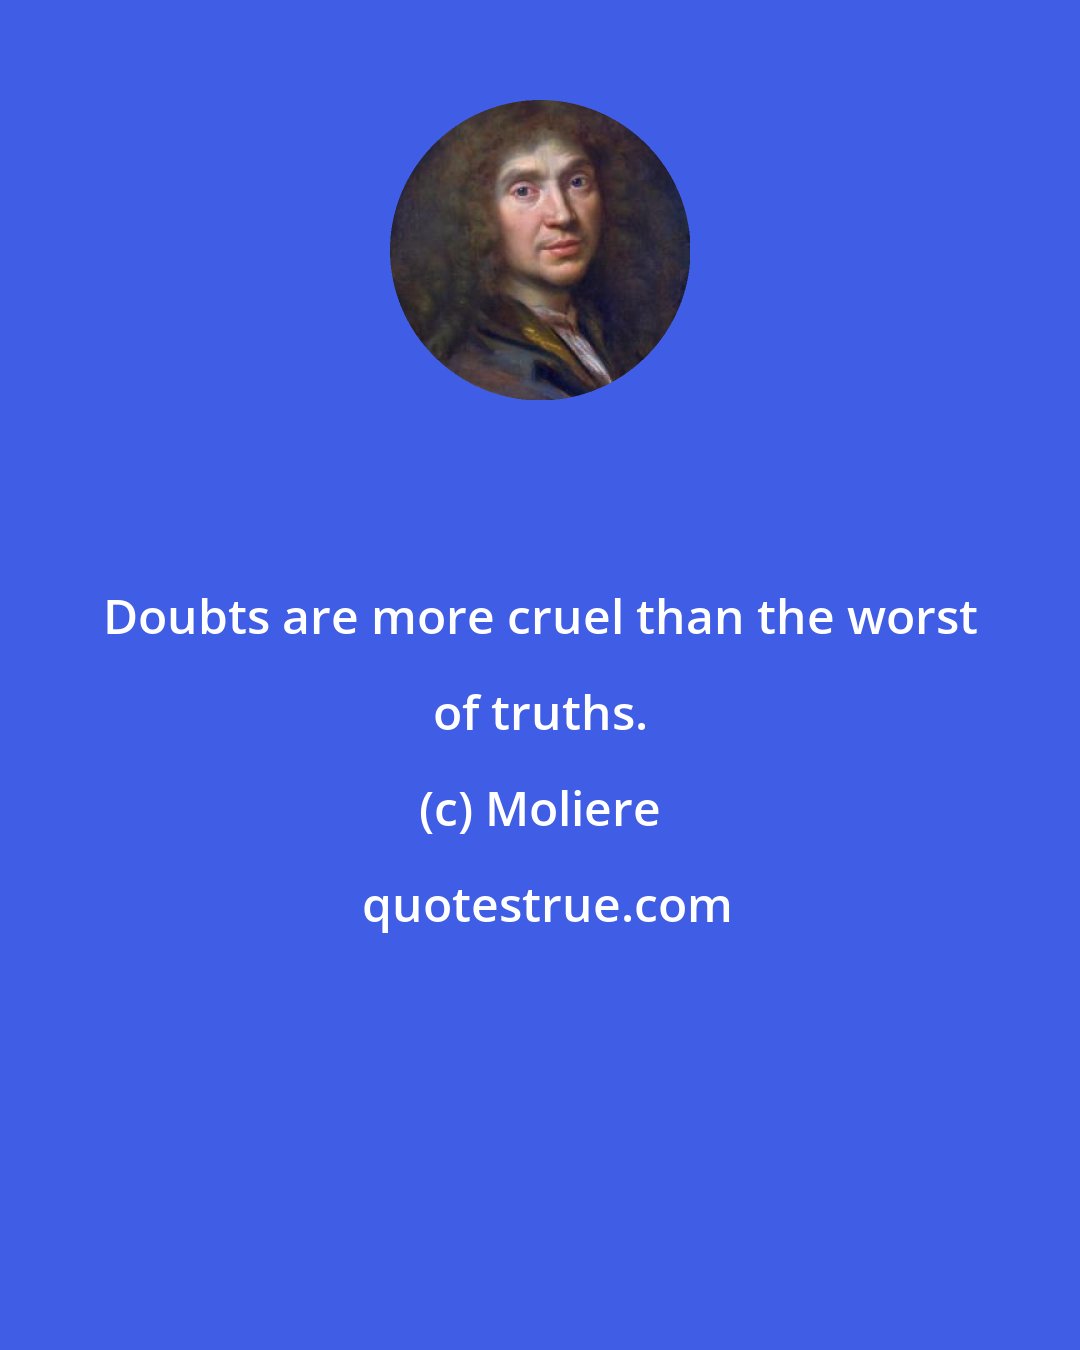 Moliere: Doubts are more cruel than the worst of truths.